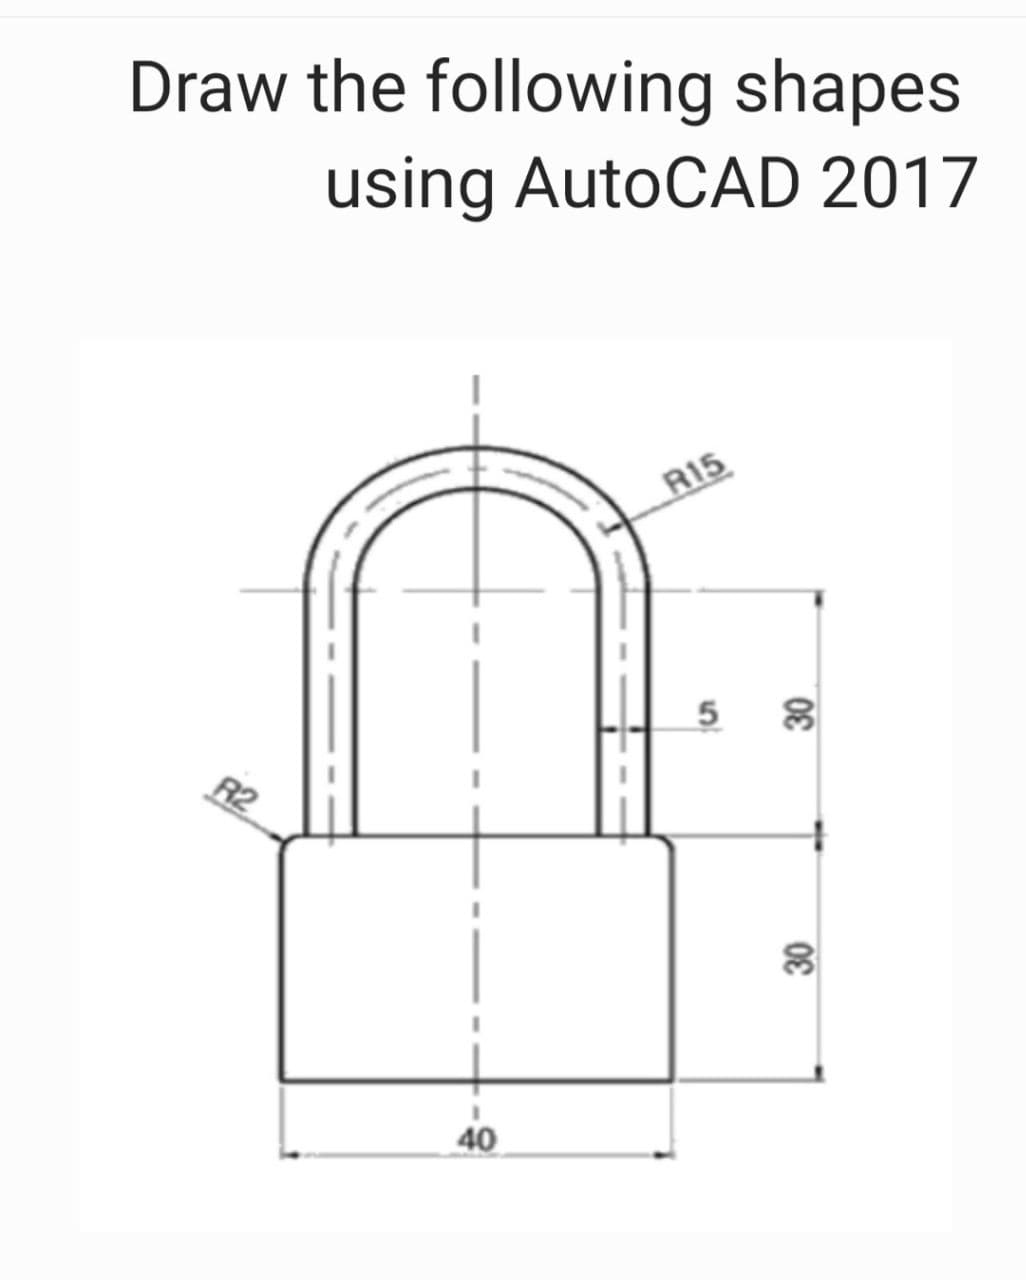 Draw the following shapes
using AutoCAD 2017
R15
5
30
R2
30
40
